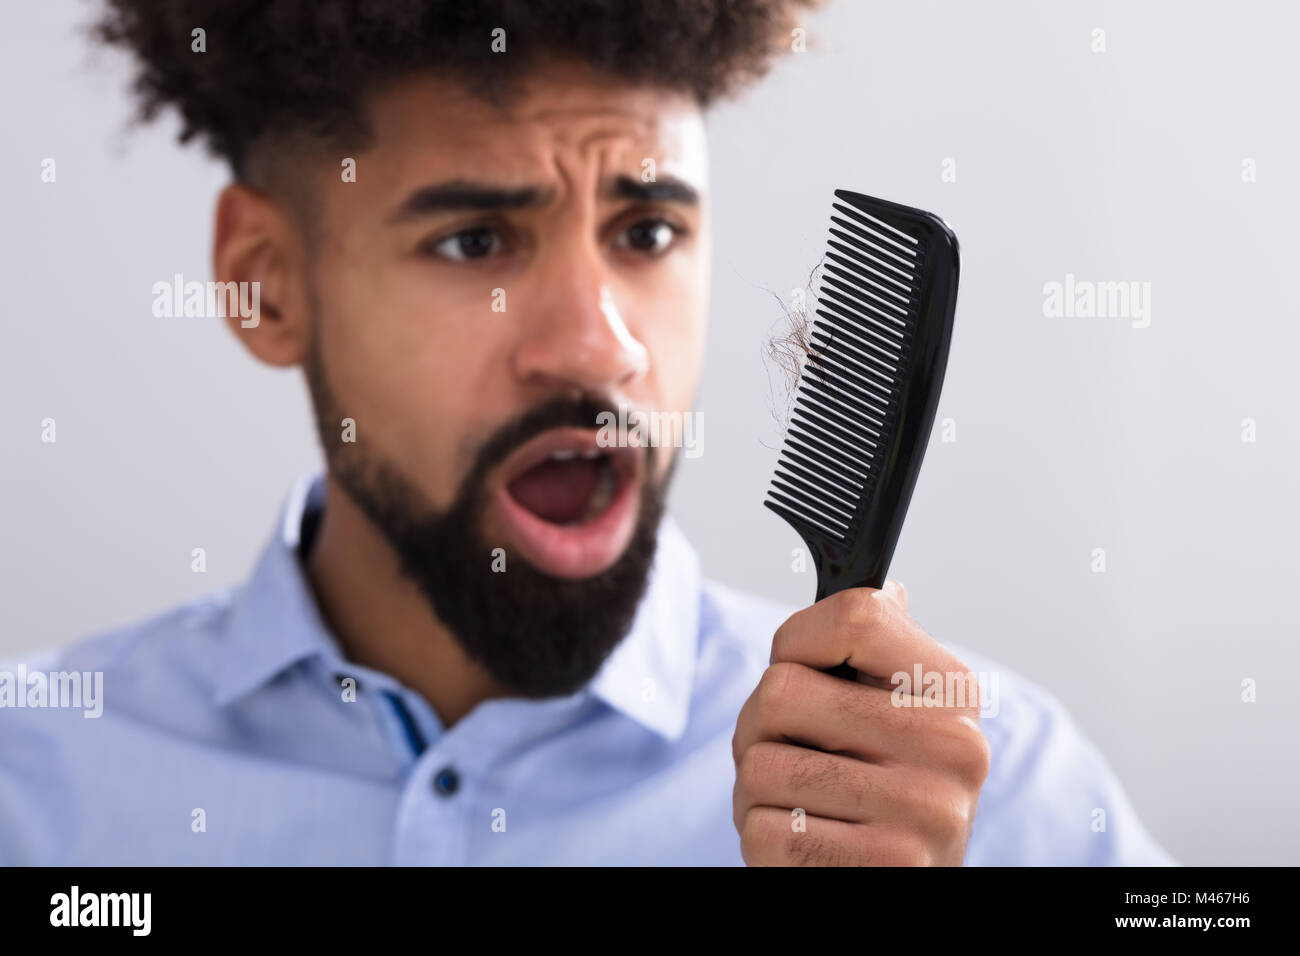 Hair Loss On Floor After Comb Stock Photo 1209695395  Shutterstock